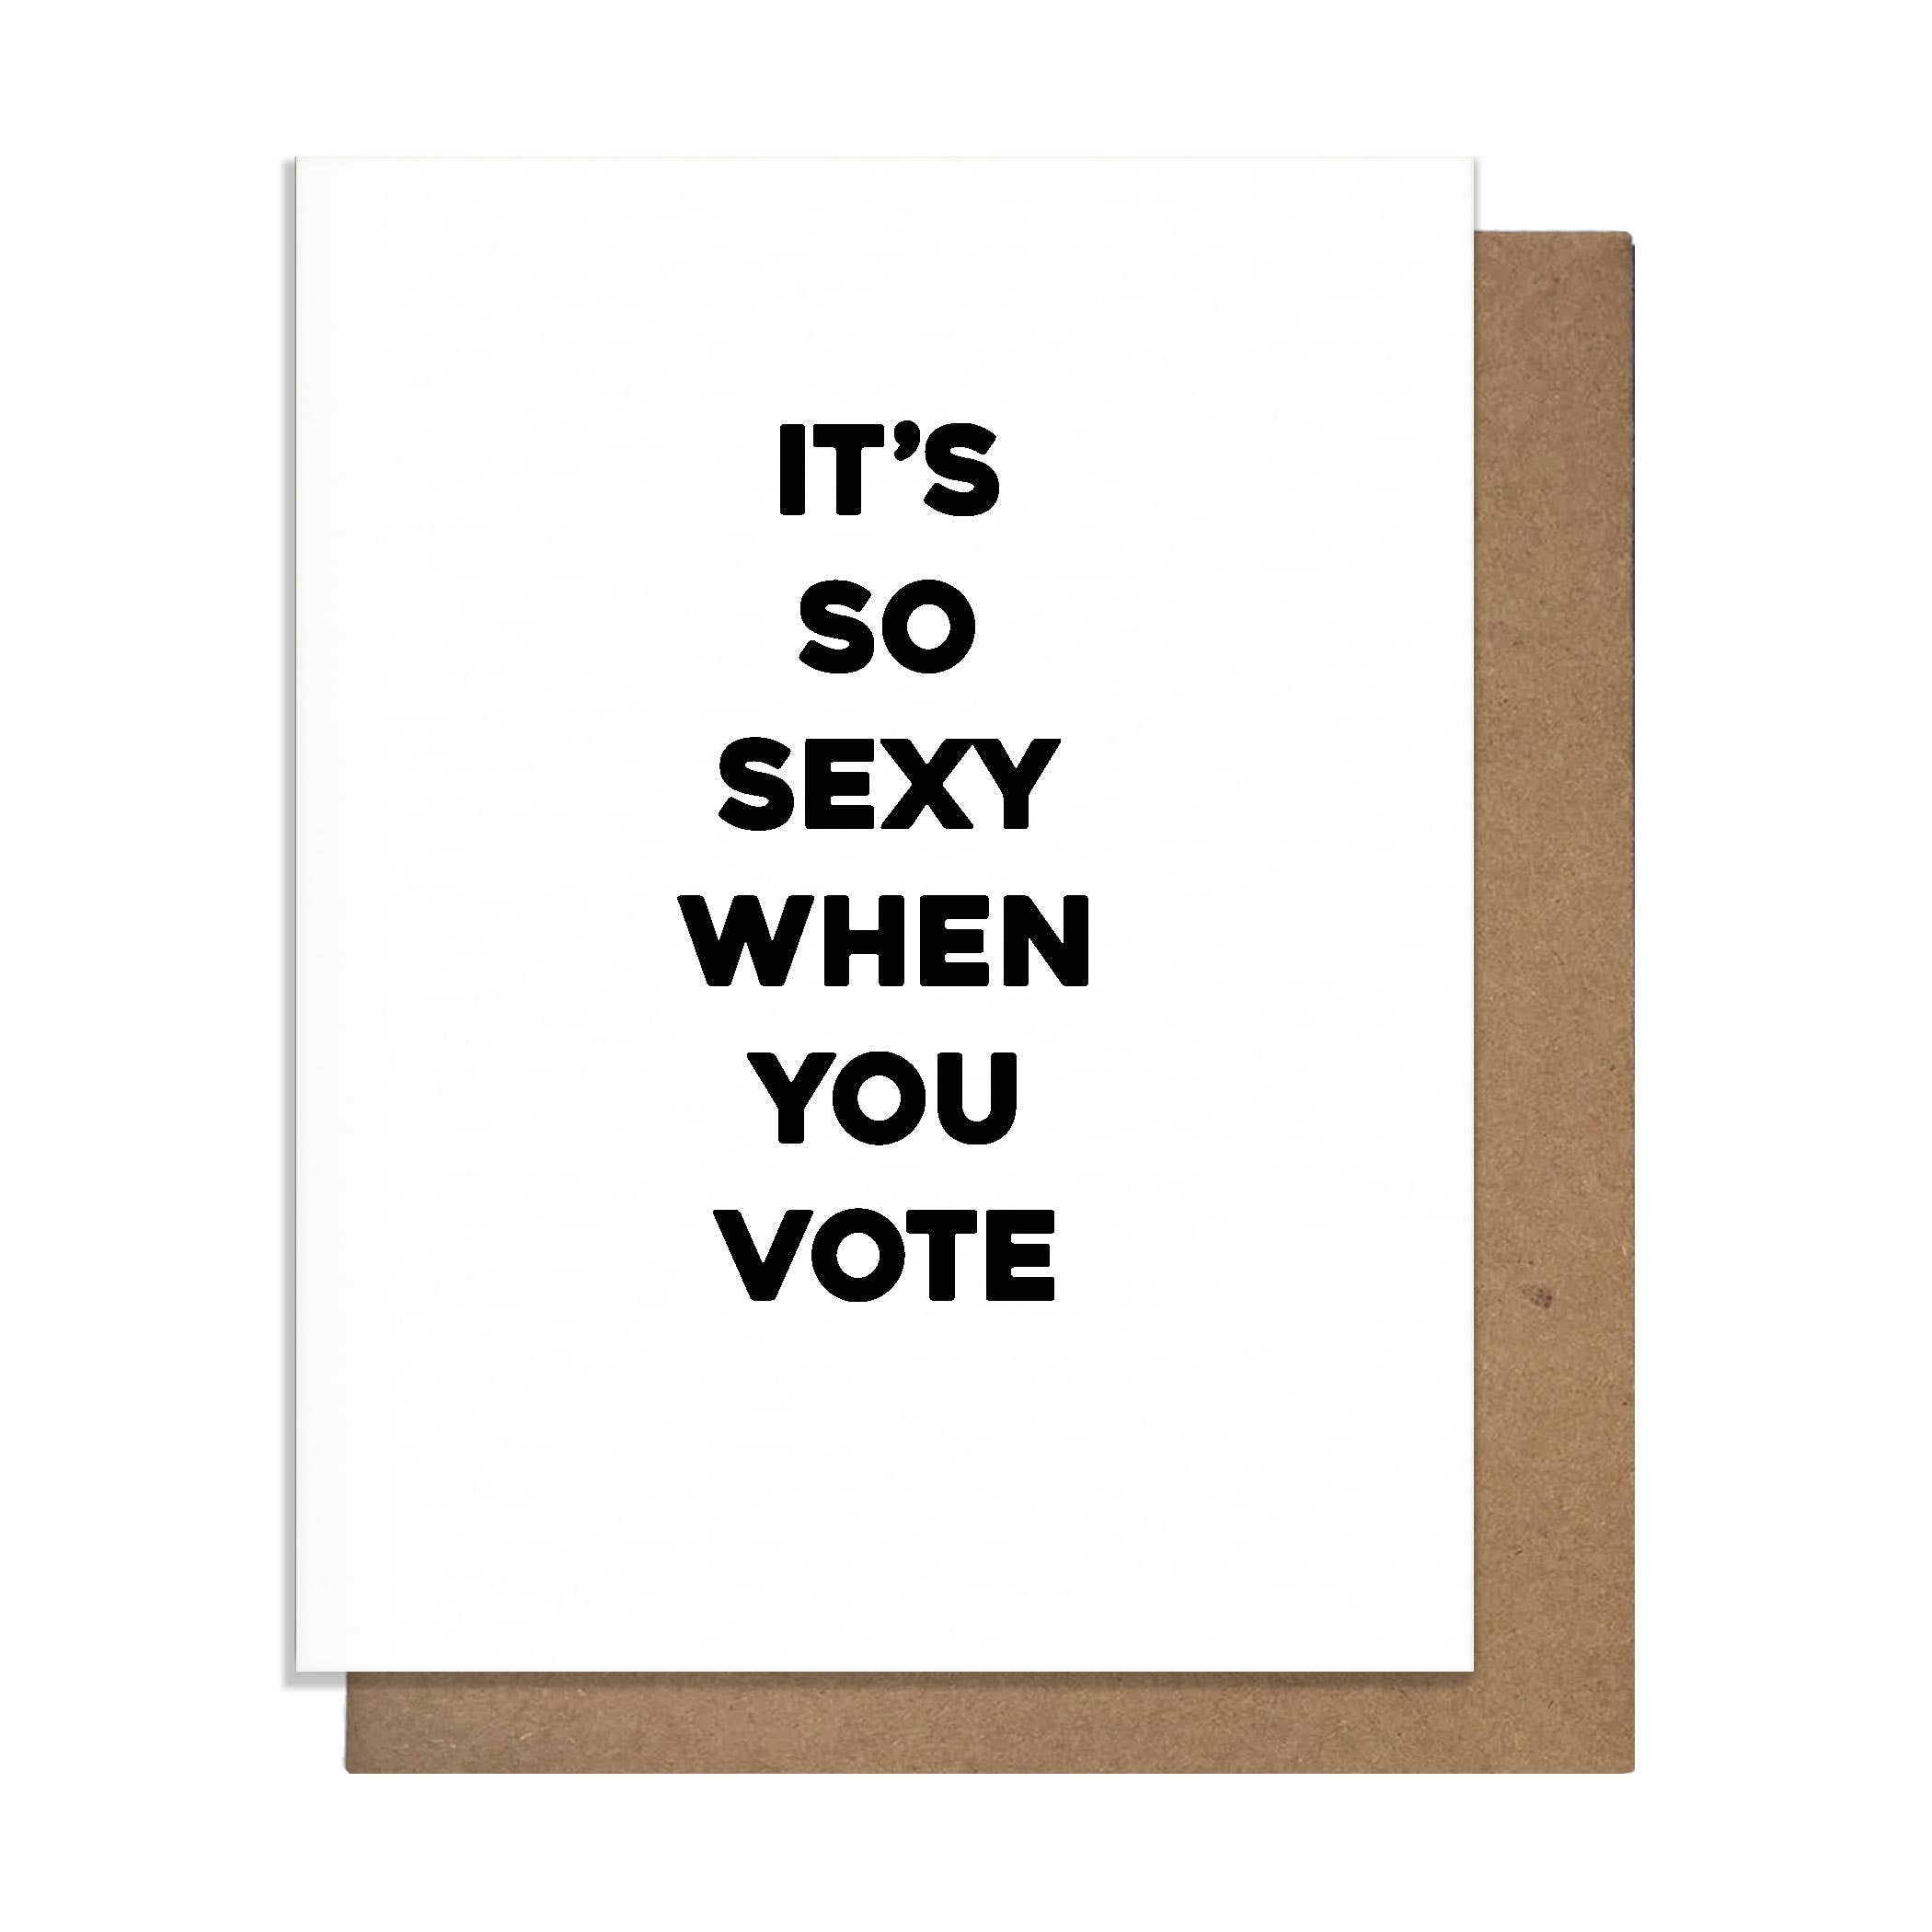 Pretty Alright Goods Greeting Card - Sexy Vote